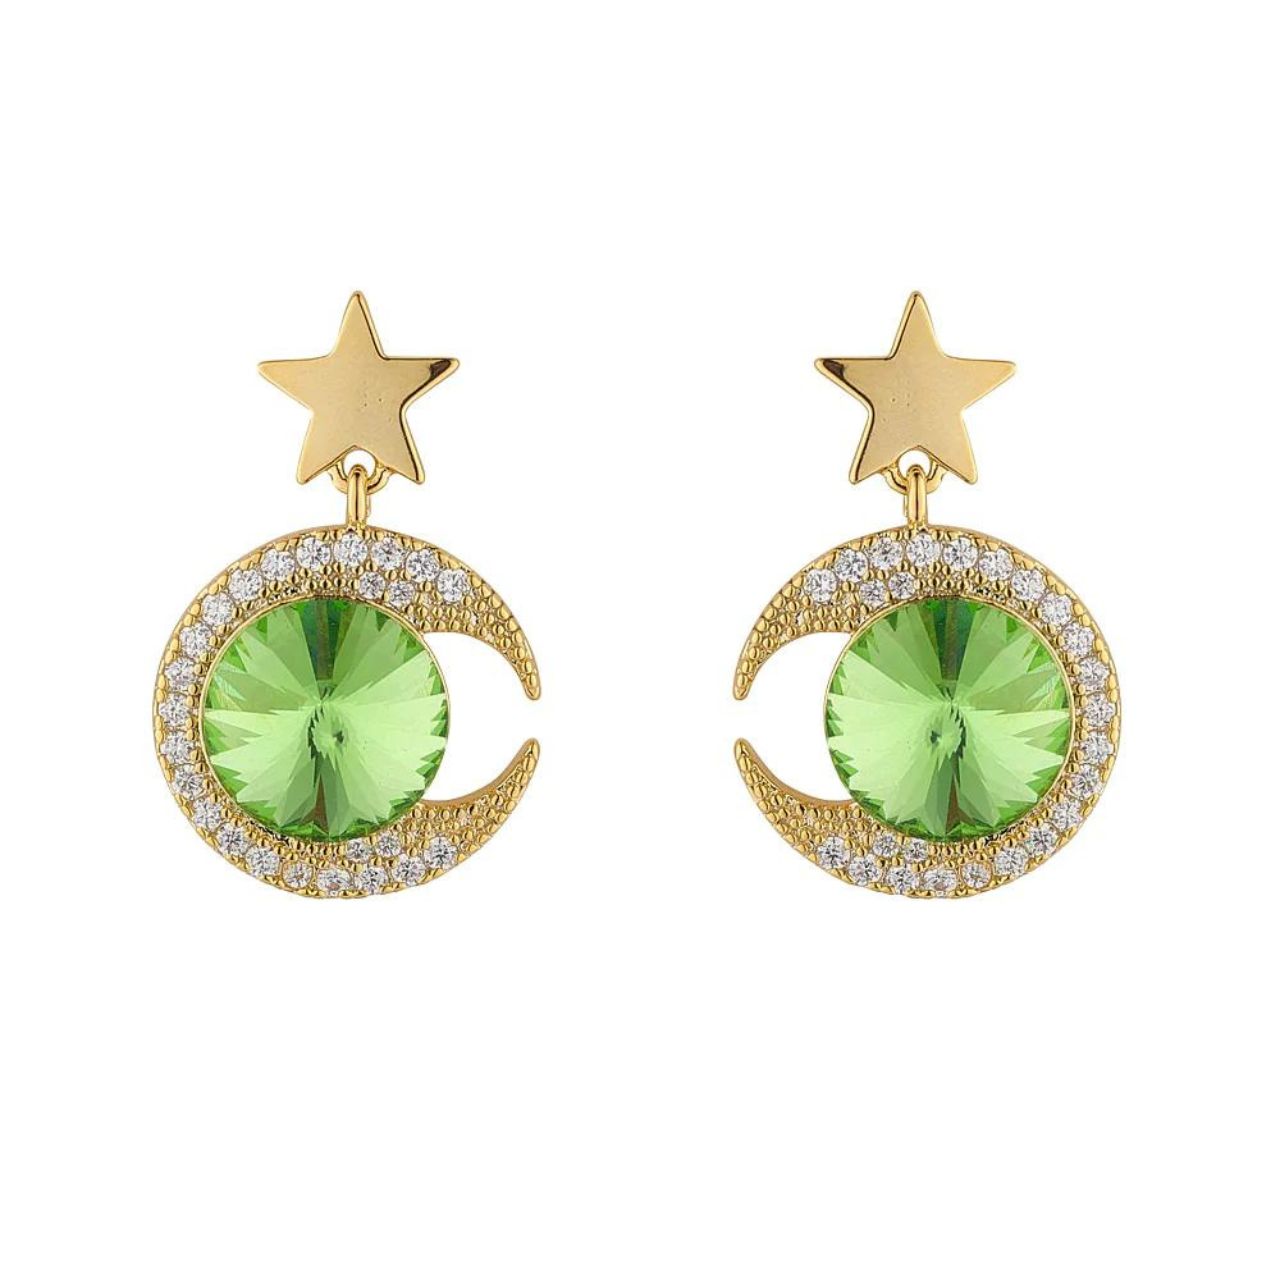 Green Moon Crystal Earrings by Knight & Day  Crystal encrusted moon shape embellished with green crystal centre piece. Star shaped stud fitting.